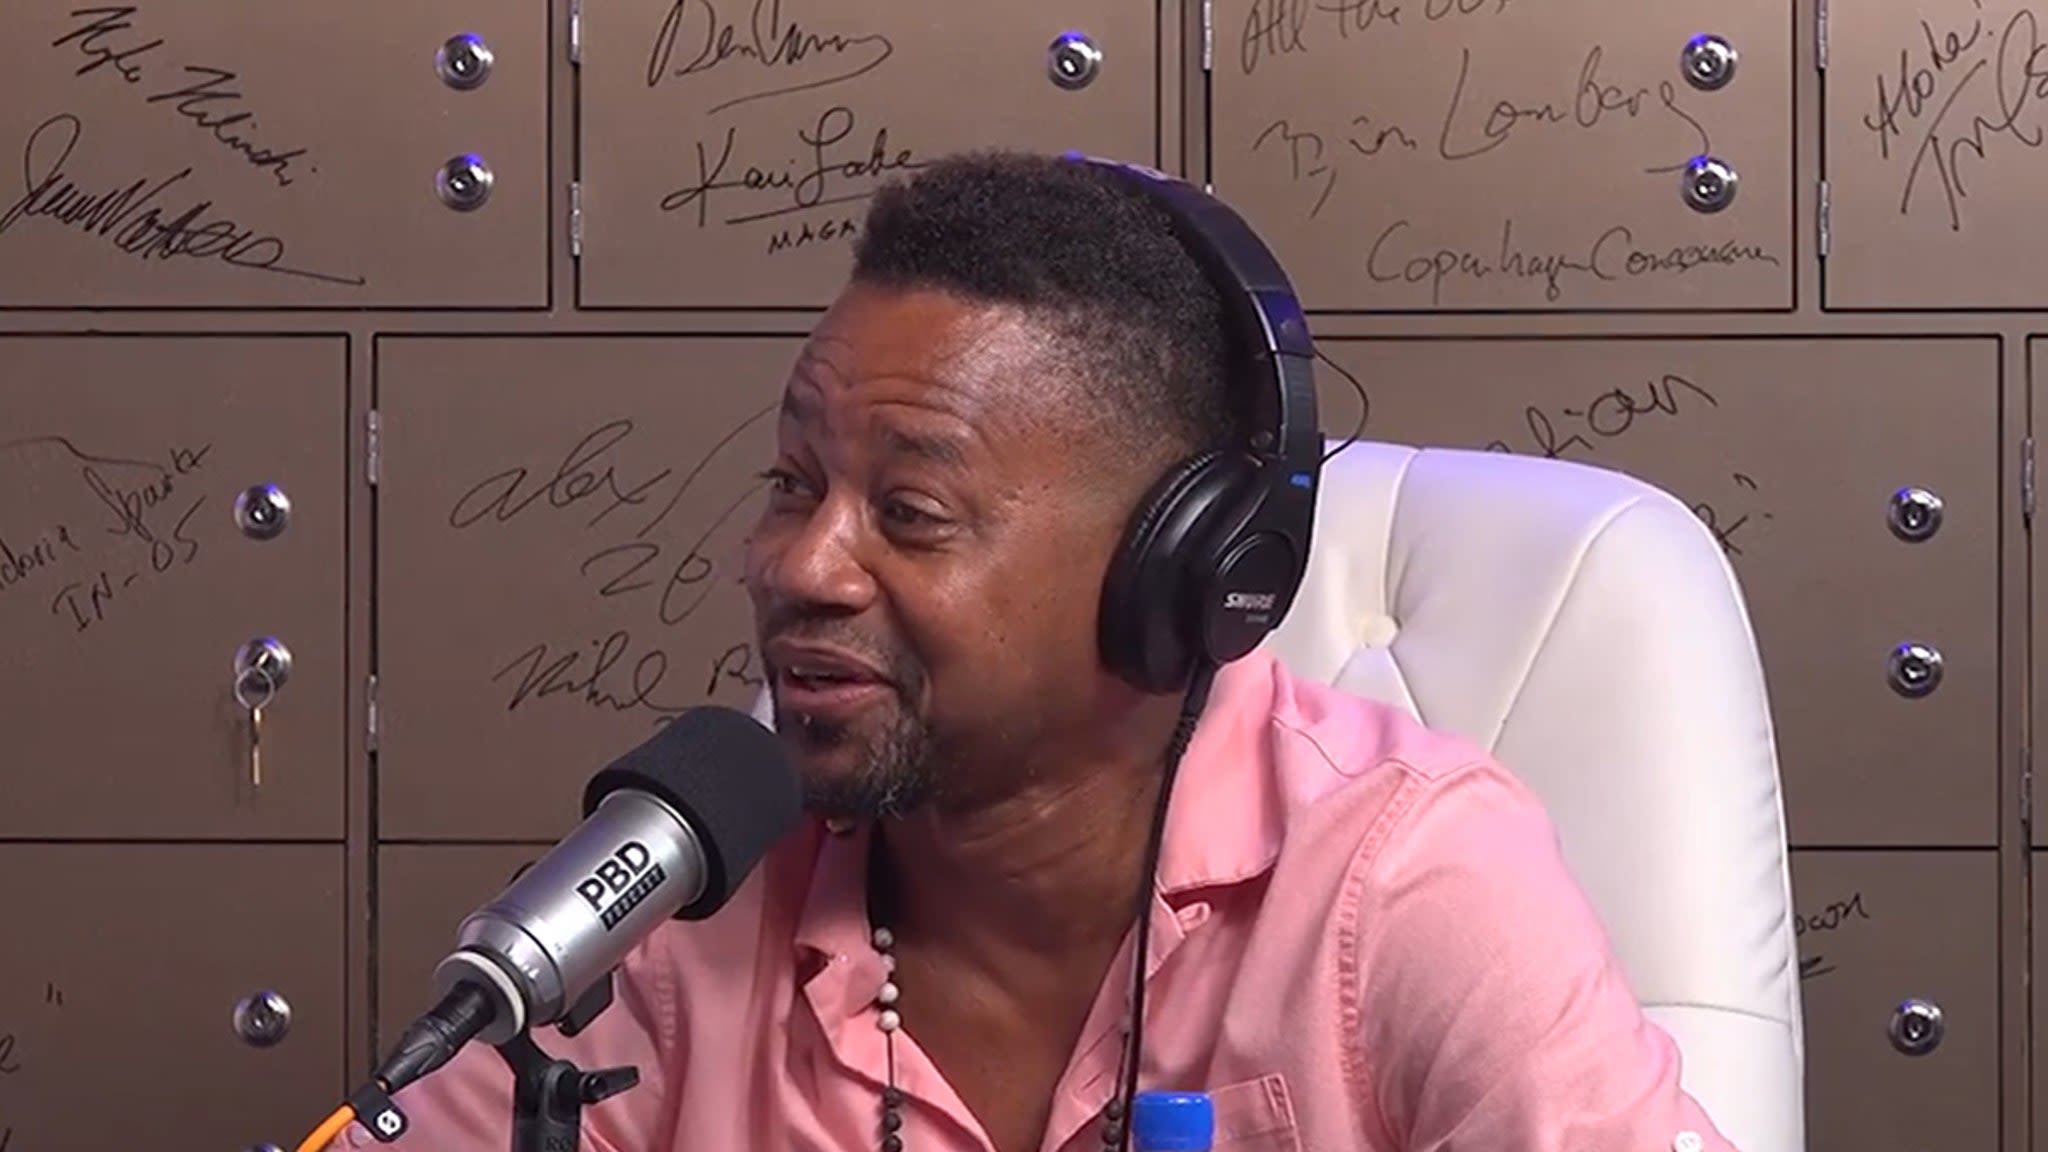 Cuba Gooding Jr. Responds to Claims in Rodney Jones' Diddy Lawsuit